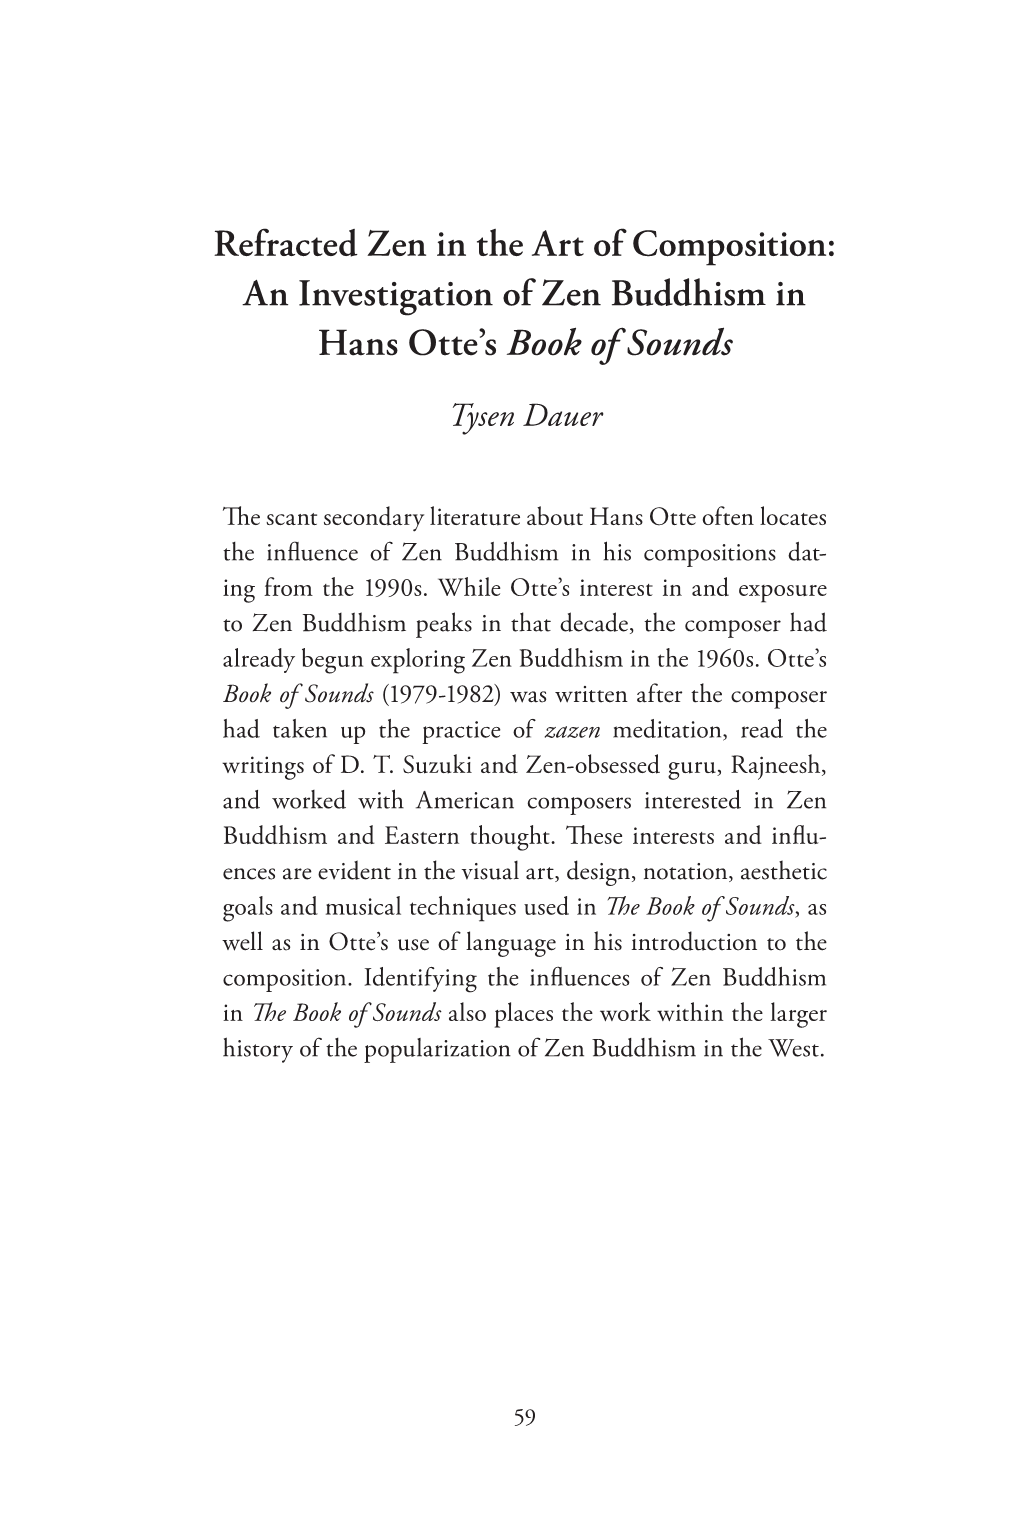 An Investigation of Zen Buddhism in Hans Otte's Book of Sounds